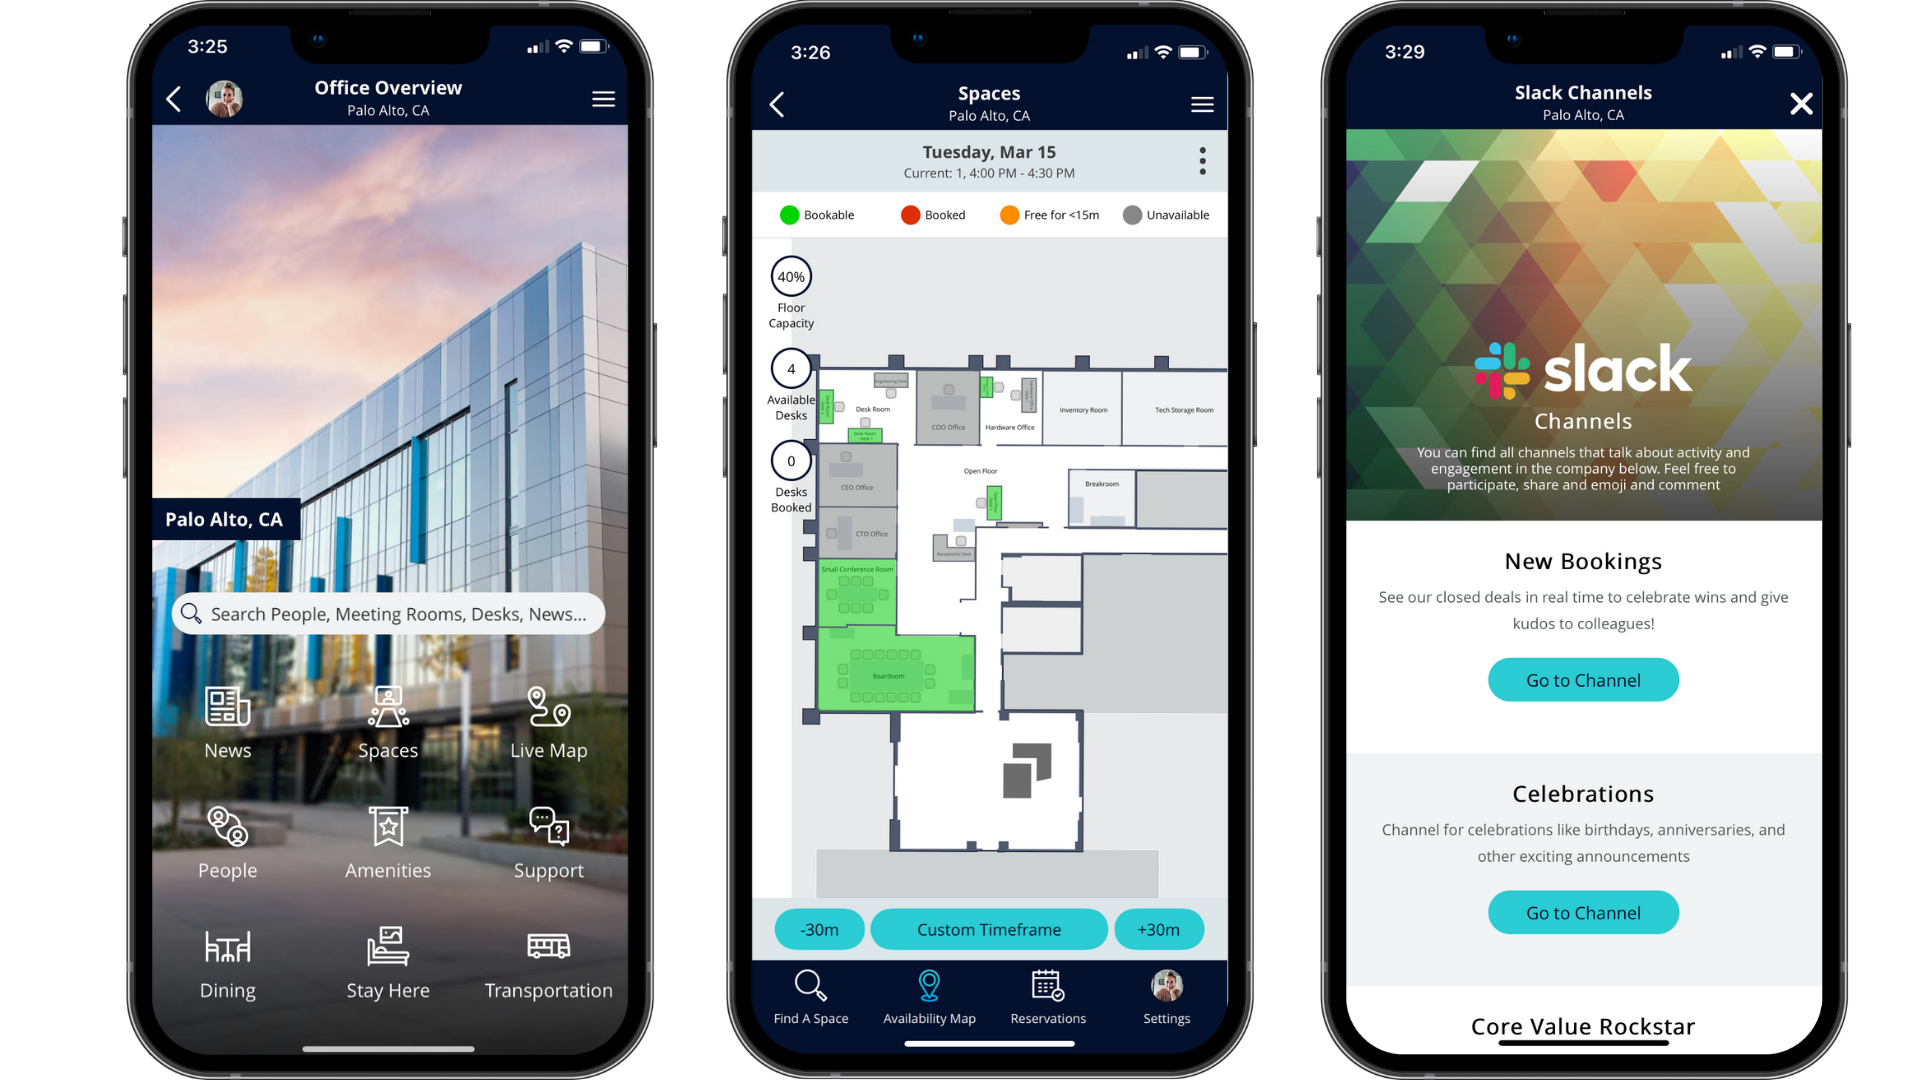 Inpixon workplace experience app screens show campus info, occupancy reporting on a live map, and integrated slack app for employee communication.